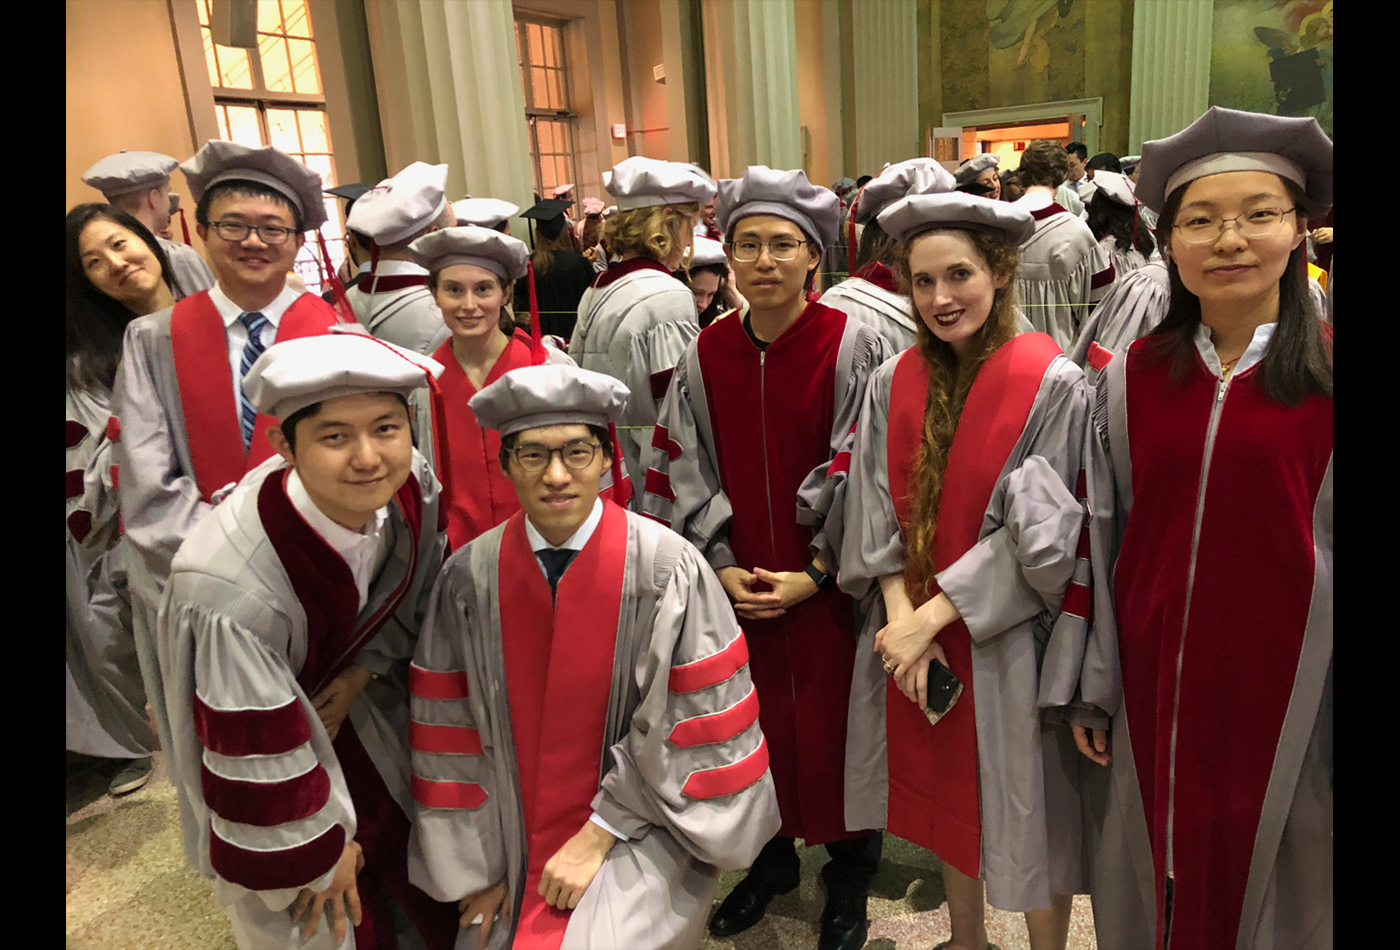 Doctoral students from the Department of Chemistry prepare to receive their hoods.